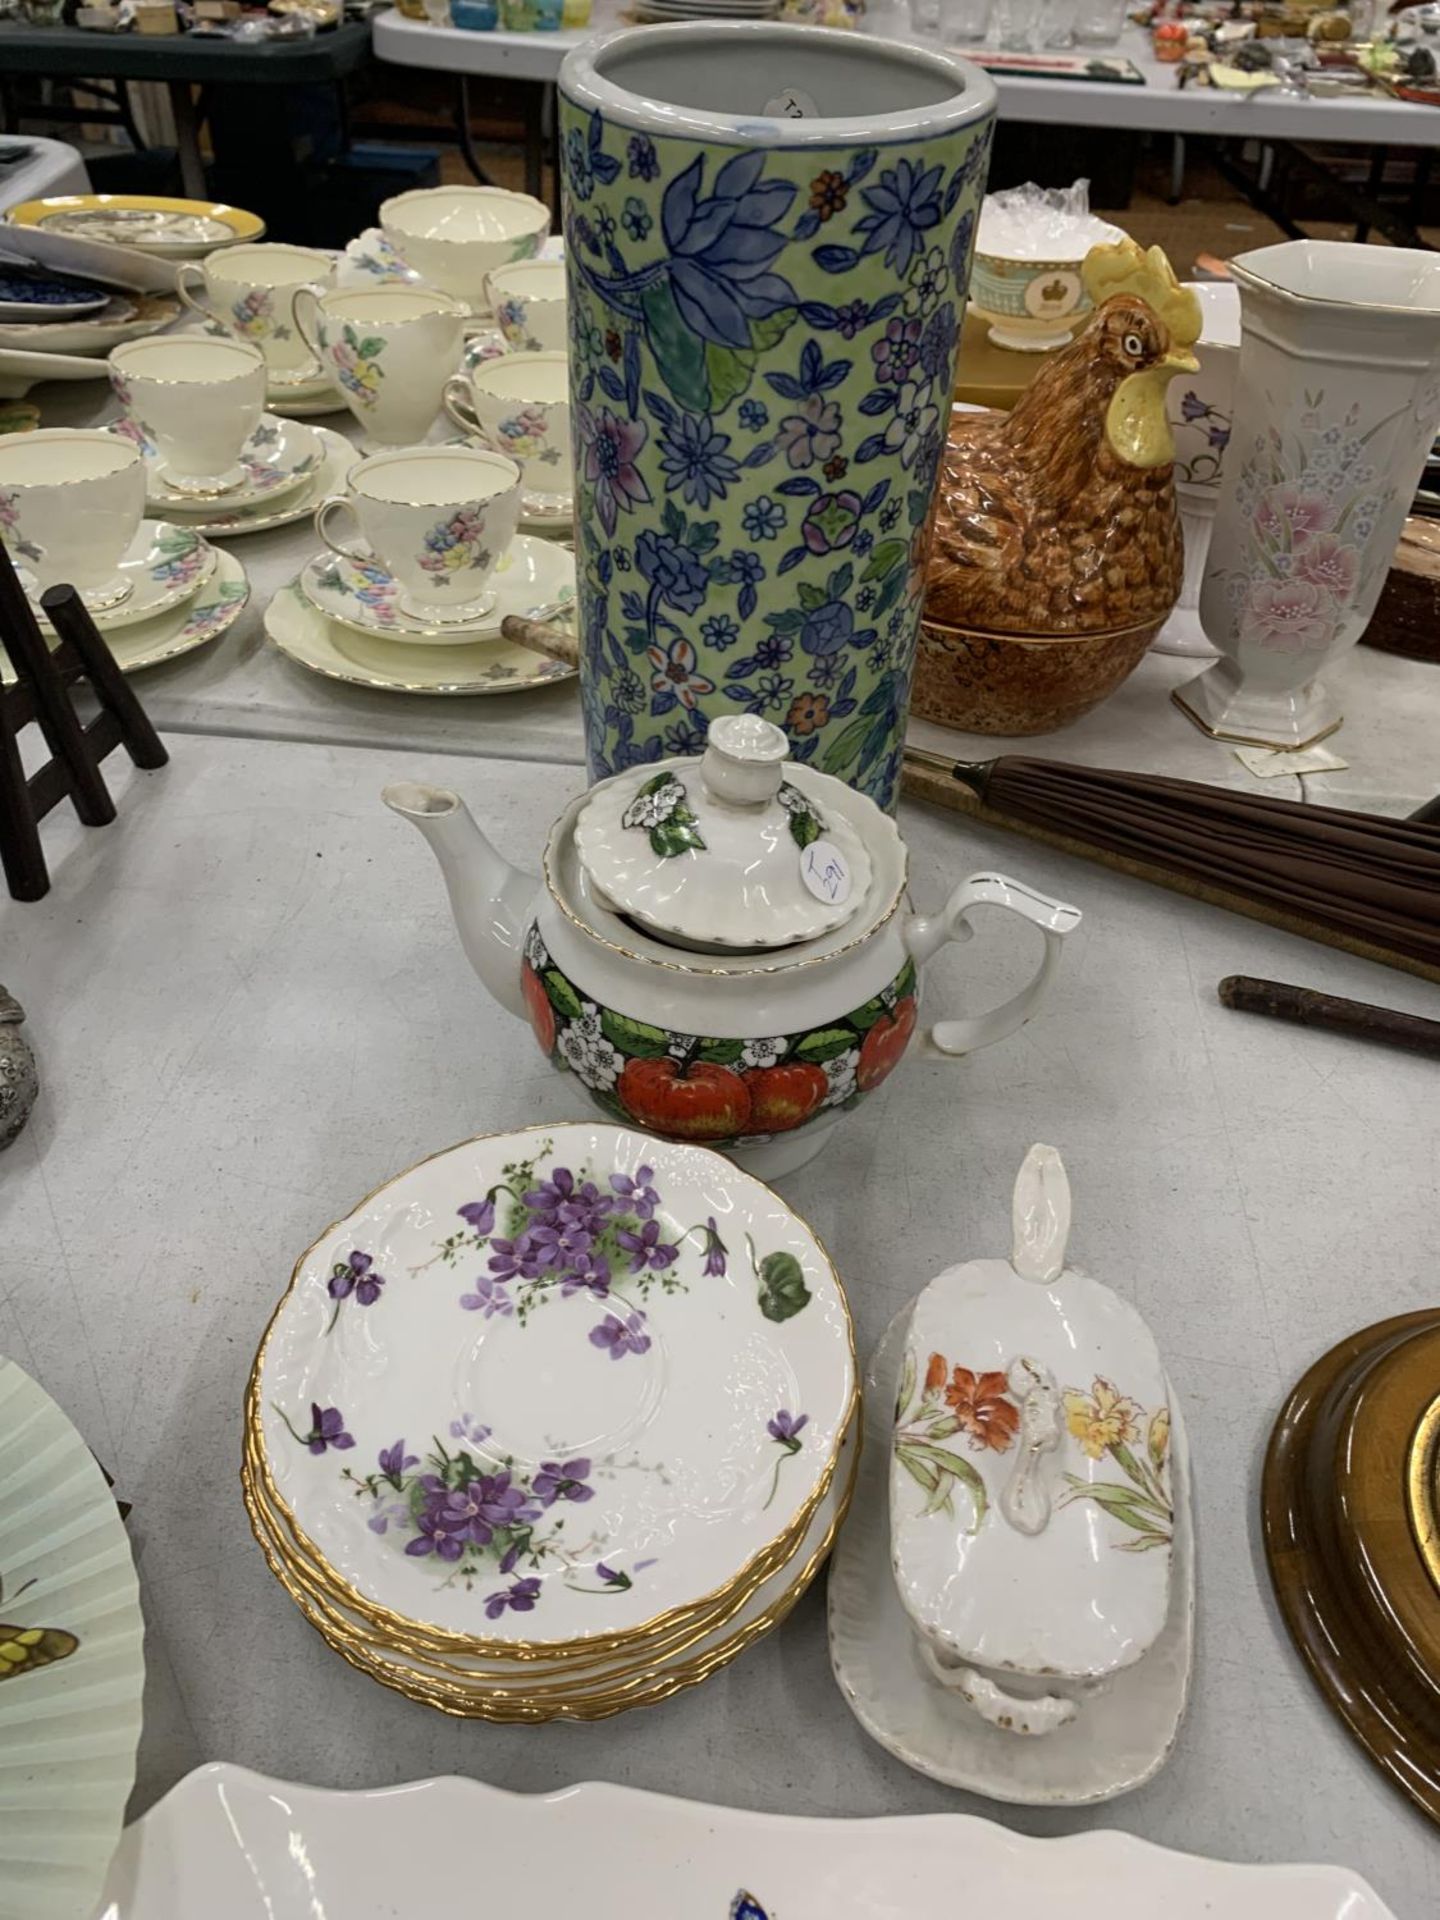 A QUANTITY OF CERAMIC ITEMS TO INCLUDE AYNSLEY SANDWICH TRAYS, A VASE, TEAPOT, PLATES, ETC - Image 6 of 6